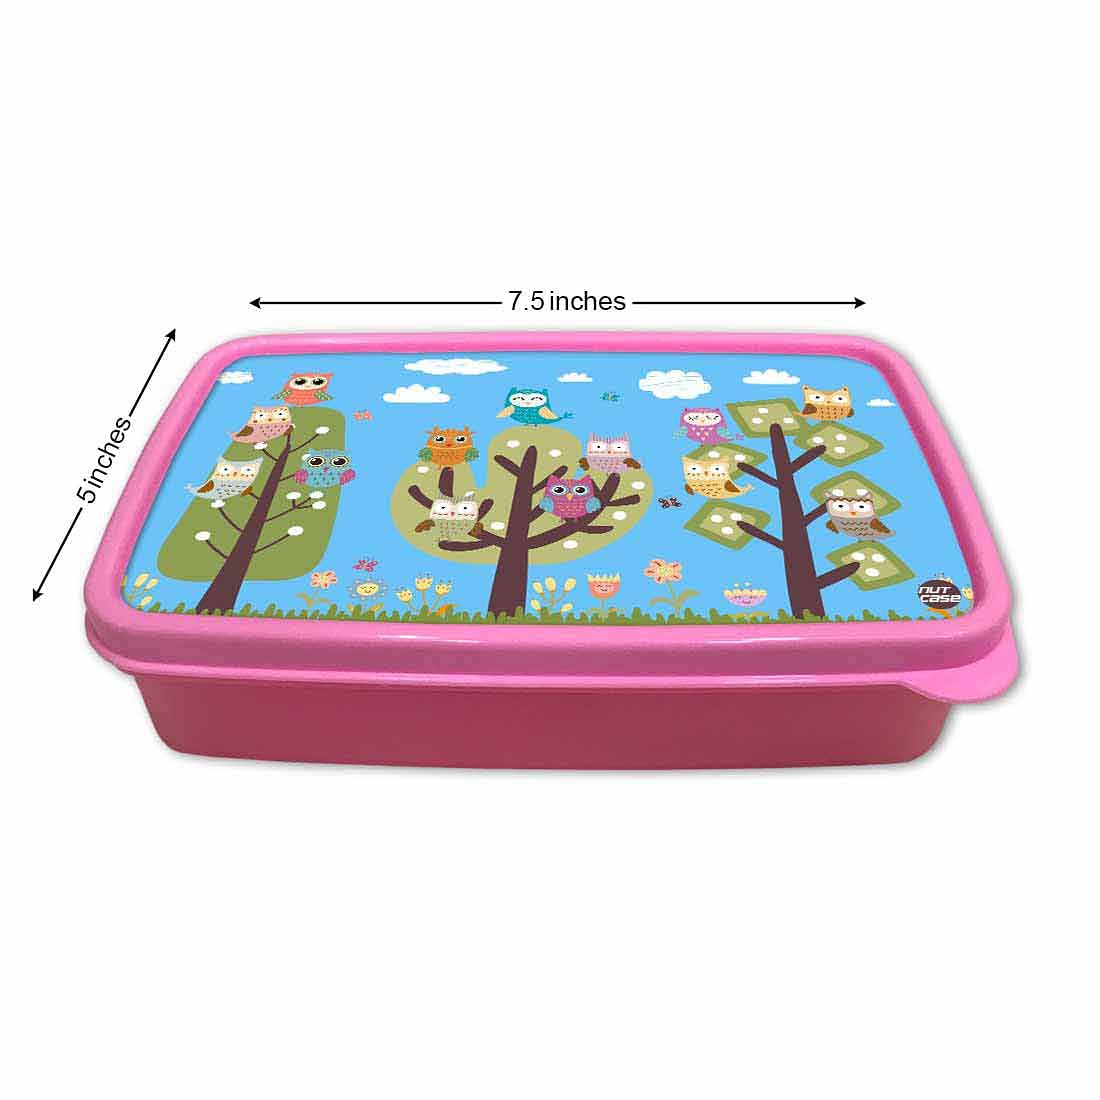 Plastic Tiffin Box for Kids Girls School Snack Containers - Small Owls Nutcase